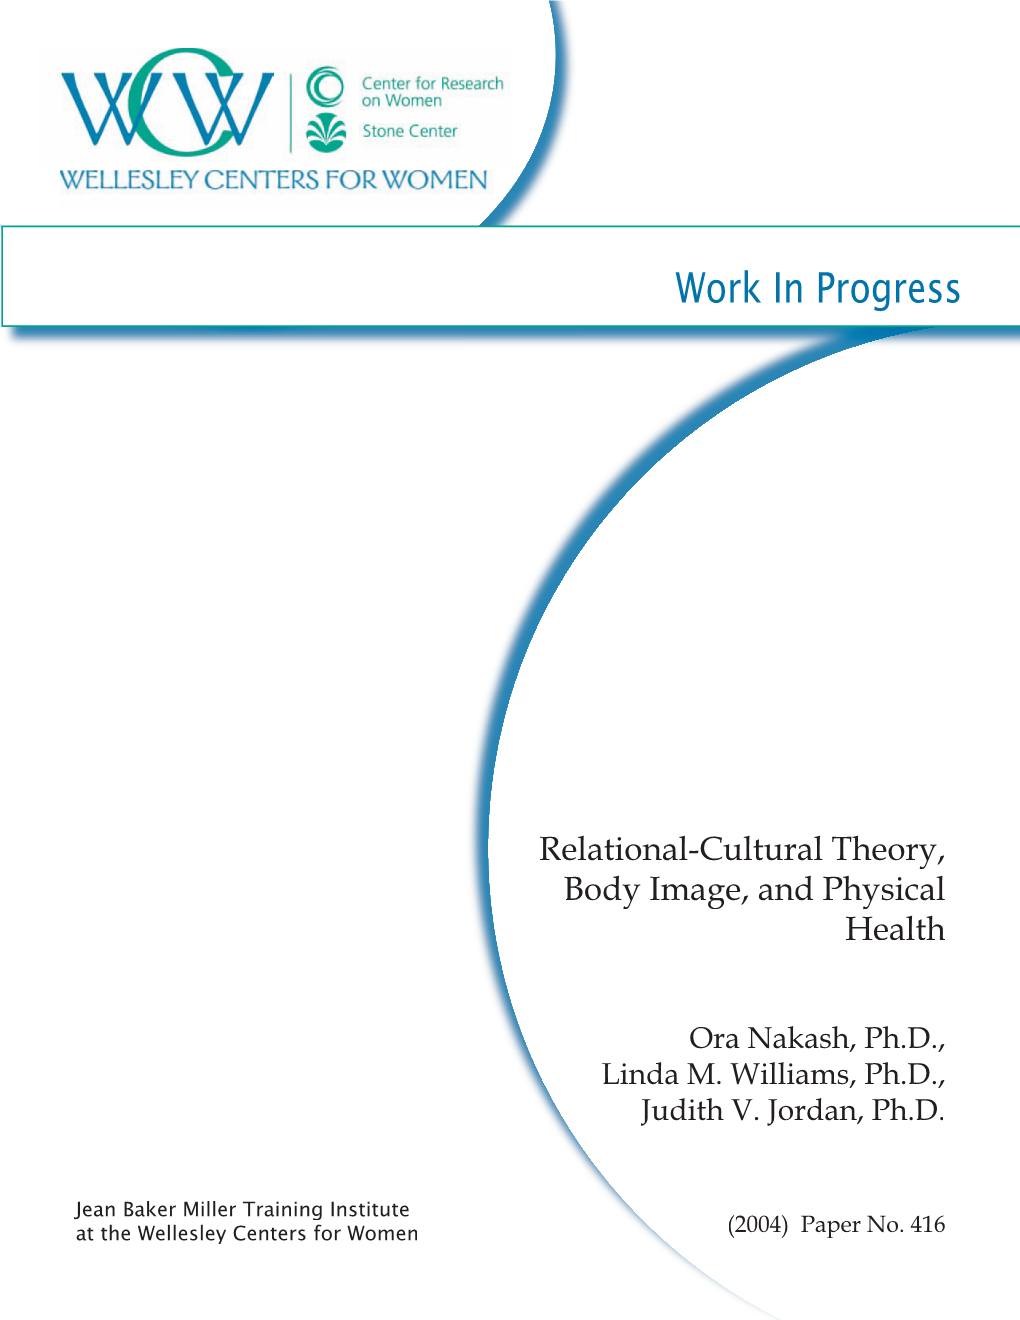 Relational-Cultural Theory, Body Image and Physical Health